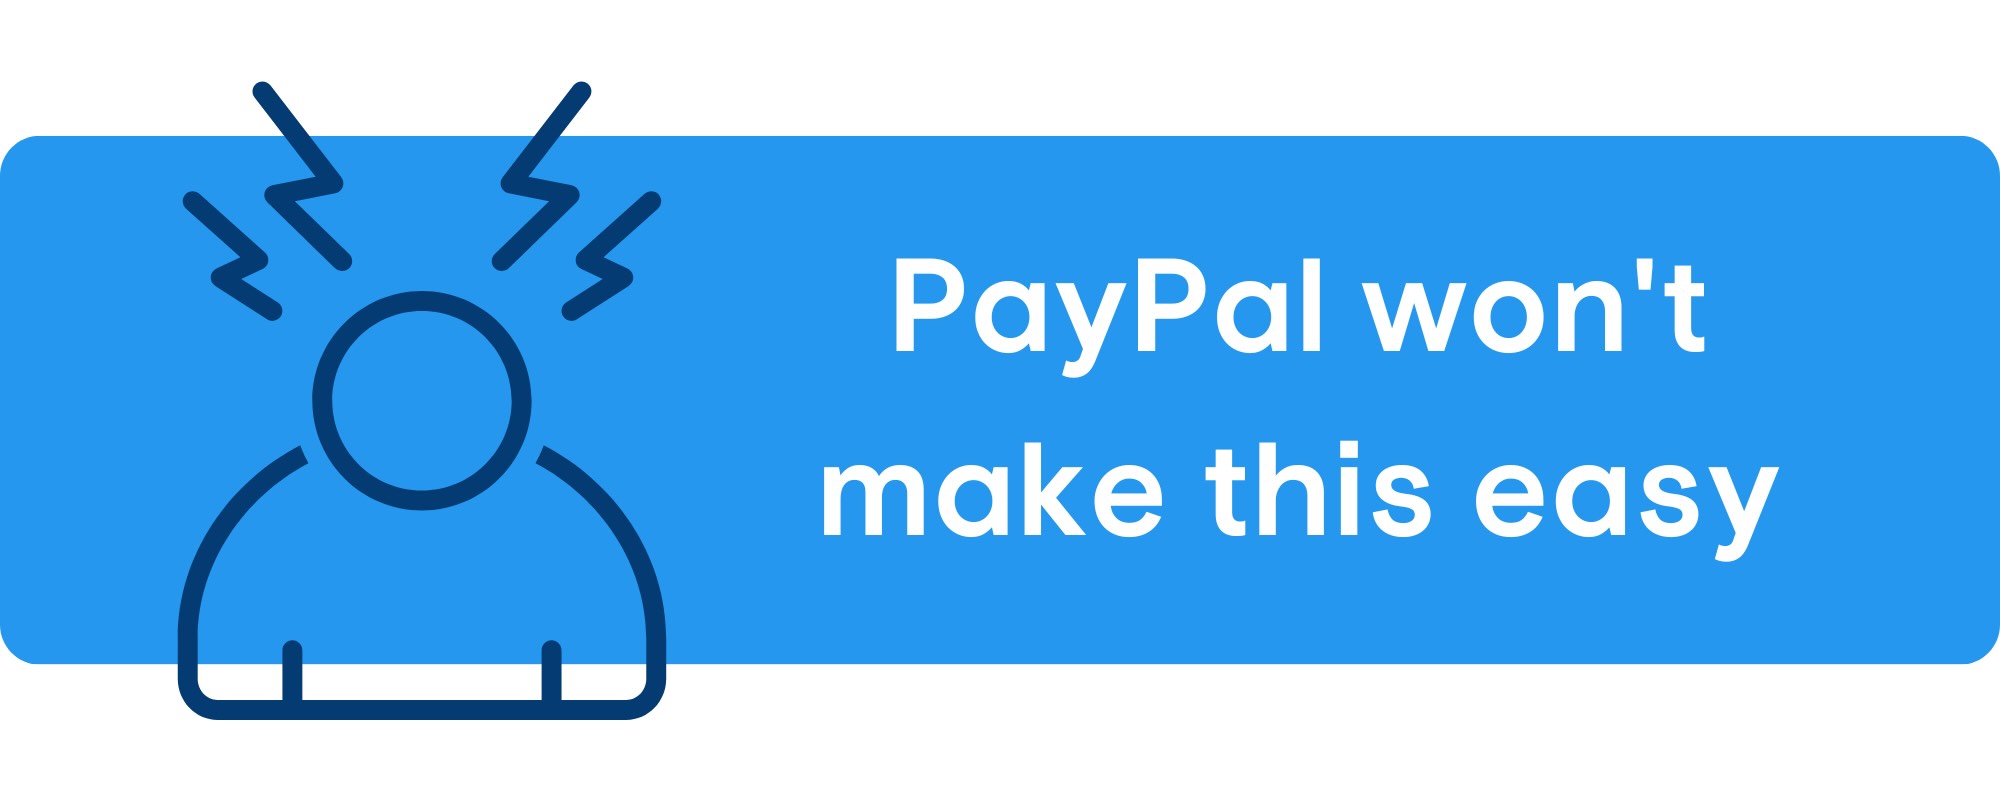 PayPal for churches: The ugly truth